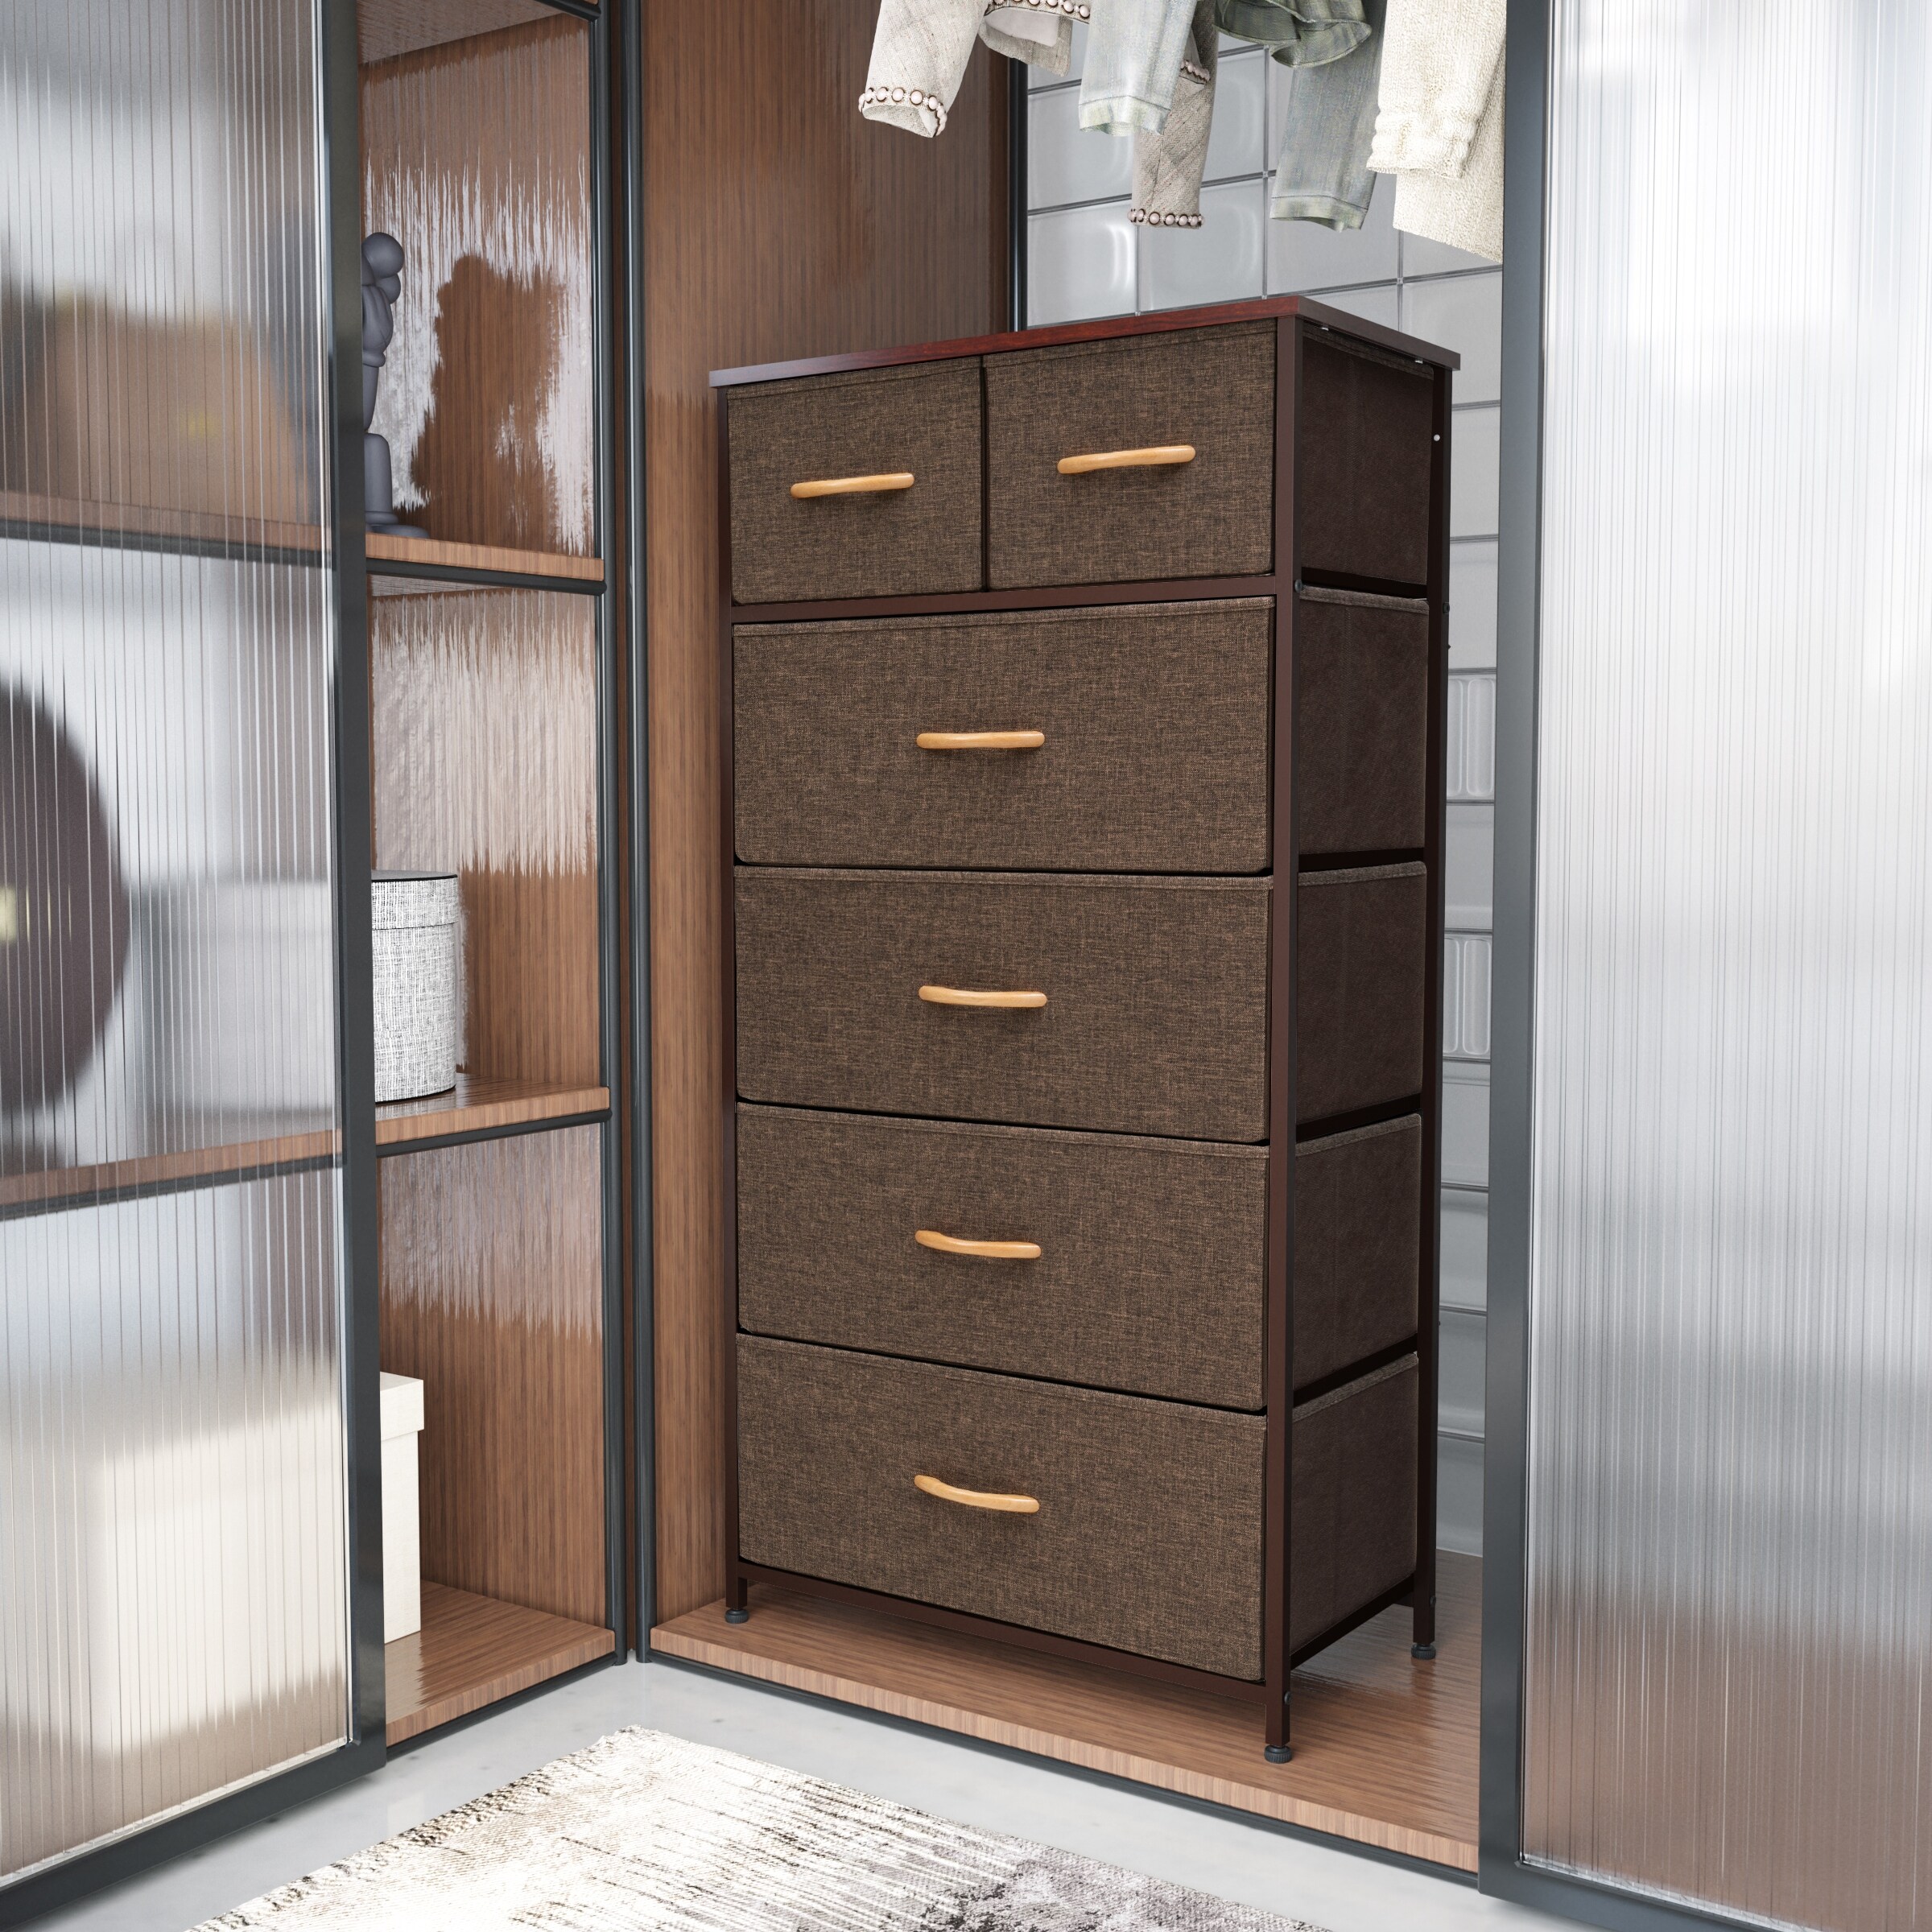 https://ak1.ostkcdn.com/images/products/is/images/direct/5f0ebcfc51ea95a39c61921c42eaeb7301b597e8/VredHom-6-Drawers-Vertical-Dresser-Storage-Tower.jpg